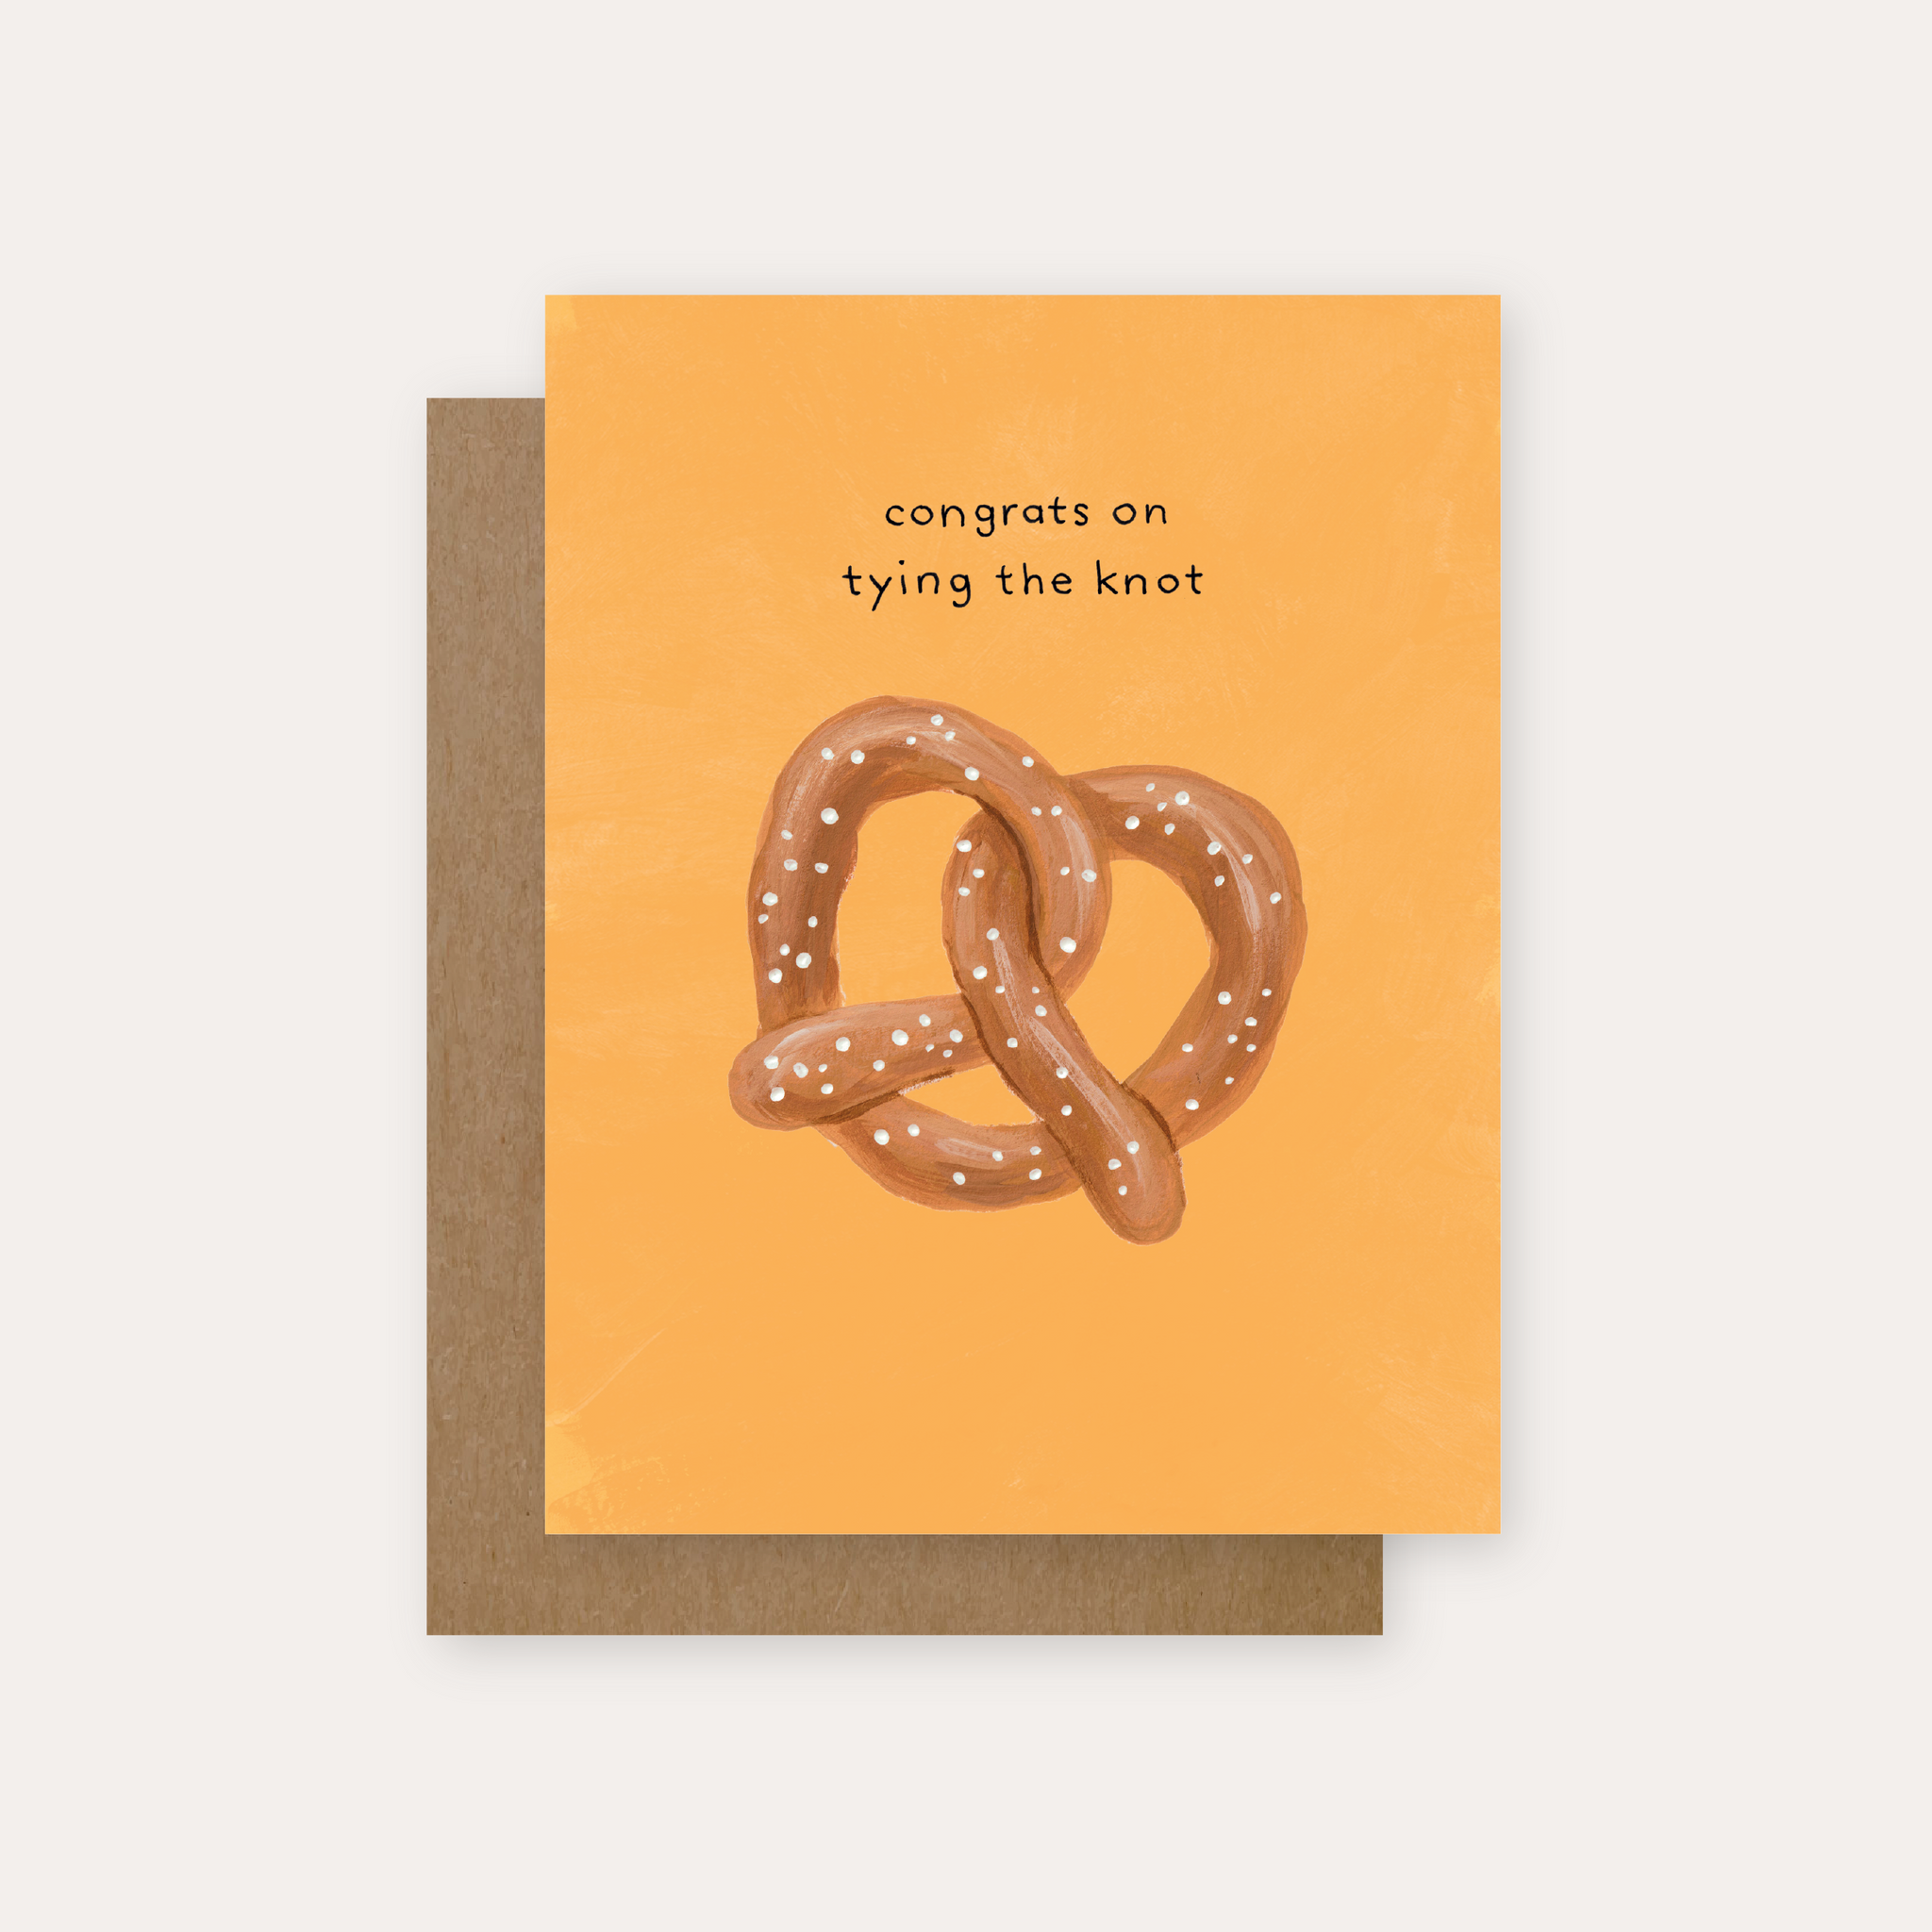 Congrats on Tying the Knot Greeting Card